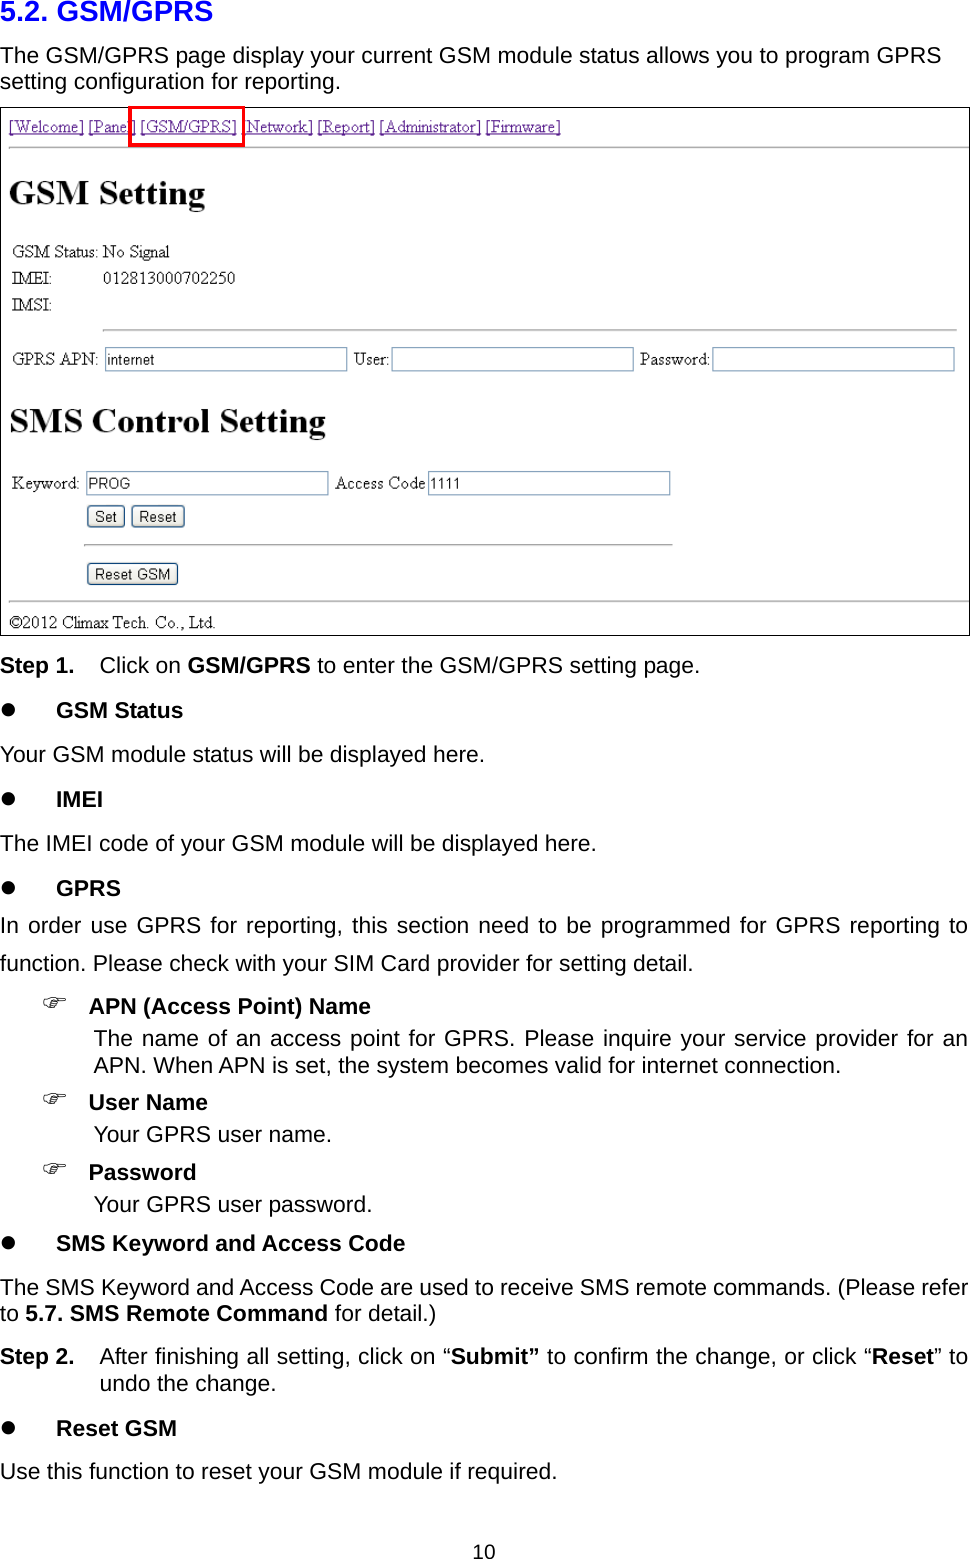  105.2. GSM/GPRS   The GSM/GPRS page display your current GSM module status allows you to program GPRS setting configuration for reporting.    Step 1. Click on GSM/GPRS to enter the GSM/GPRS setting page.  GSM Status Your GSM module status will be displayed here.  IMEI The IMEI code of your GSM module will be displayed here.  GPRS In order use GPRS for reporting, this section need to be programmed for GPRS reporting to function. Please check with your SIM Card provider for setting detail.  APN (Access Point) Name The name of an access point for GPRS. Please inquire your service provider for an APN. When APN is set, the system becomes valid for internet connection.  User Name Your GPRS user name.  Password Your GPRS user password.  SMS Keyword and Access Code The SMS Keyword and Access Code are used to receive SMS remote commands. (Please refer to 5.7. SMS Remote Command for detail.) Step 2.  After finishing all setting, click on “Submit” to confirm the change, or click “Reset” to undo the change.  Reset GSM Use this function to reset your GSM module if required. 